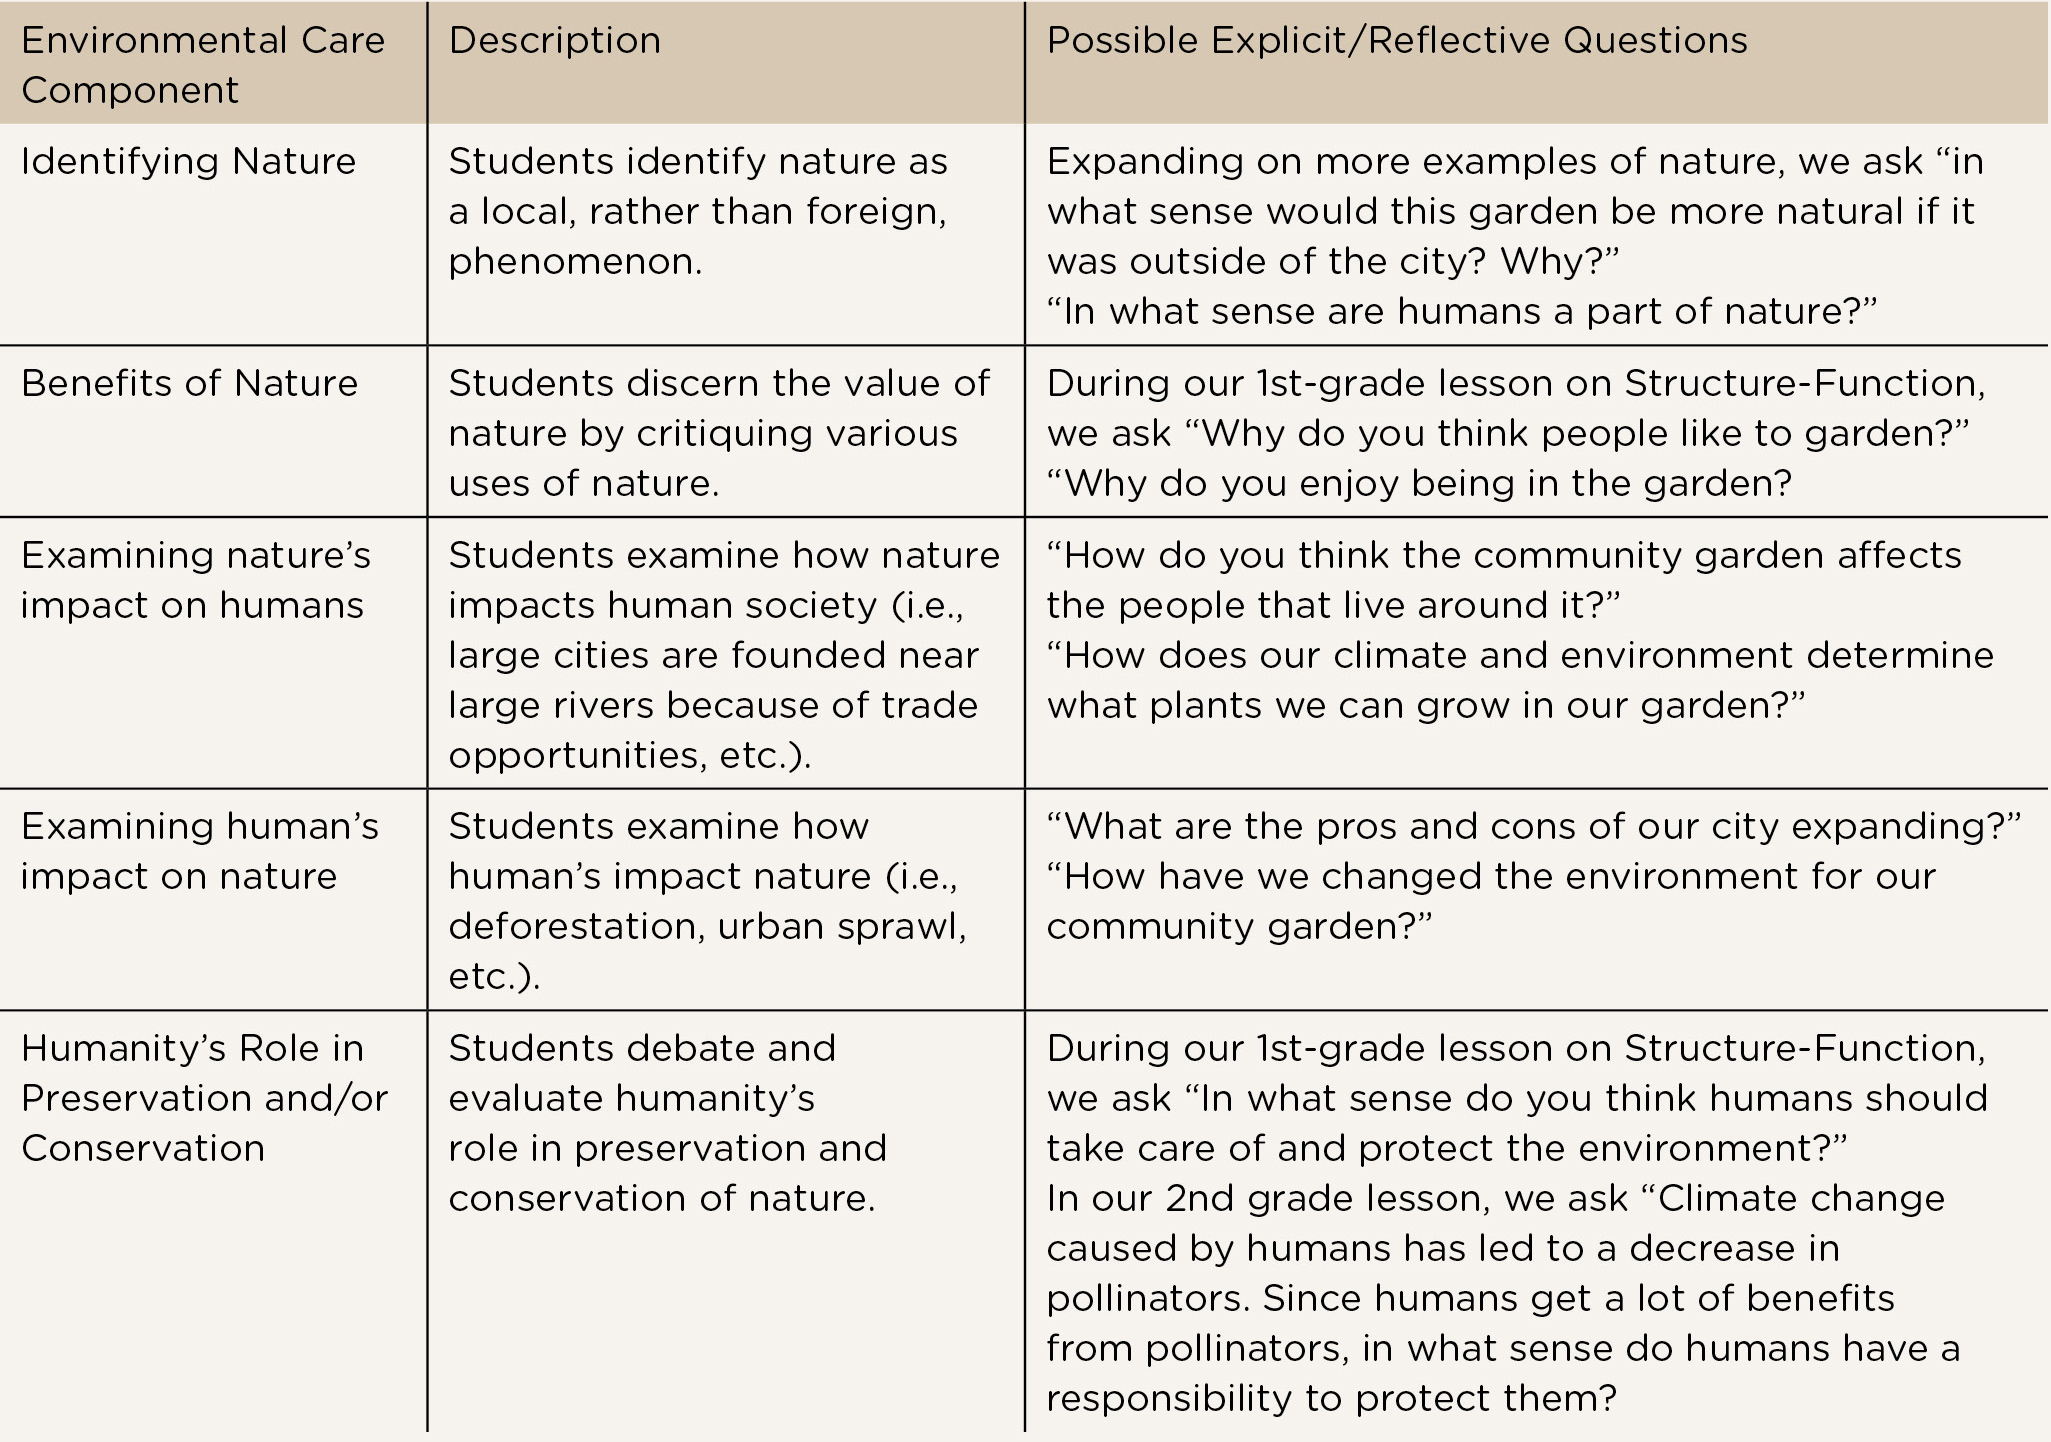 Example questions for environmental care development.